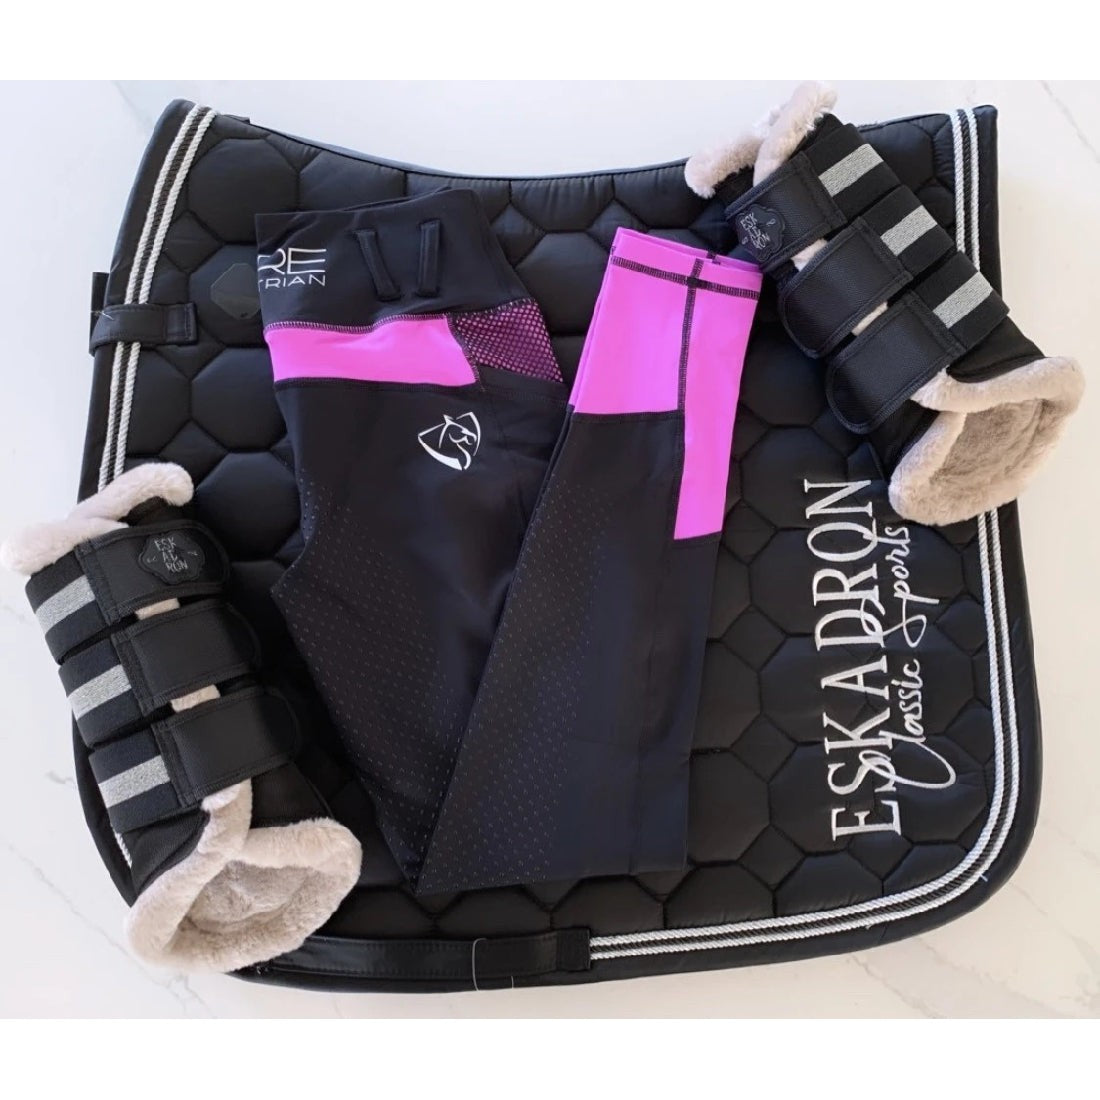 Equestrian gear with horse riding tights and leg supports displayed.